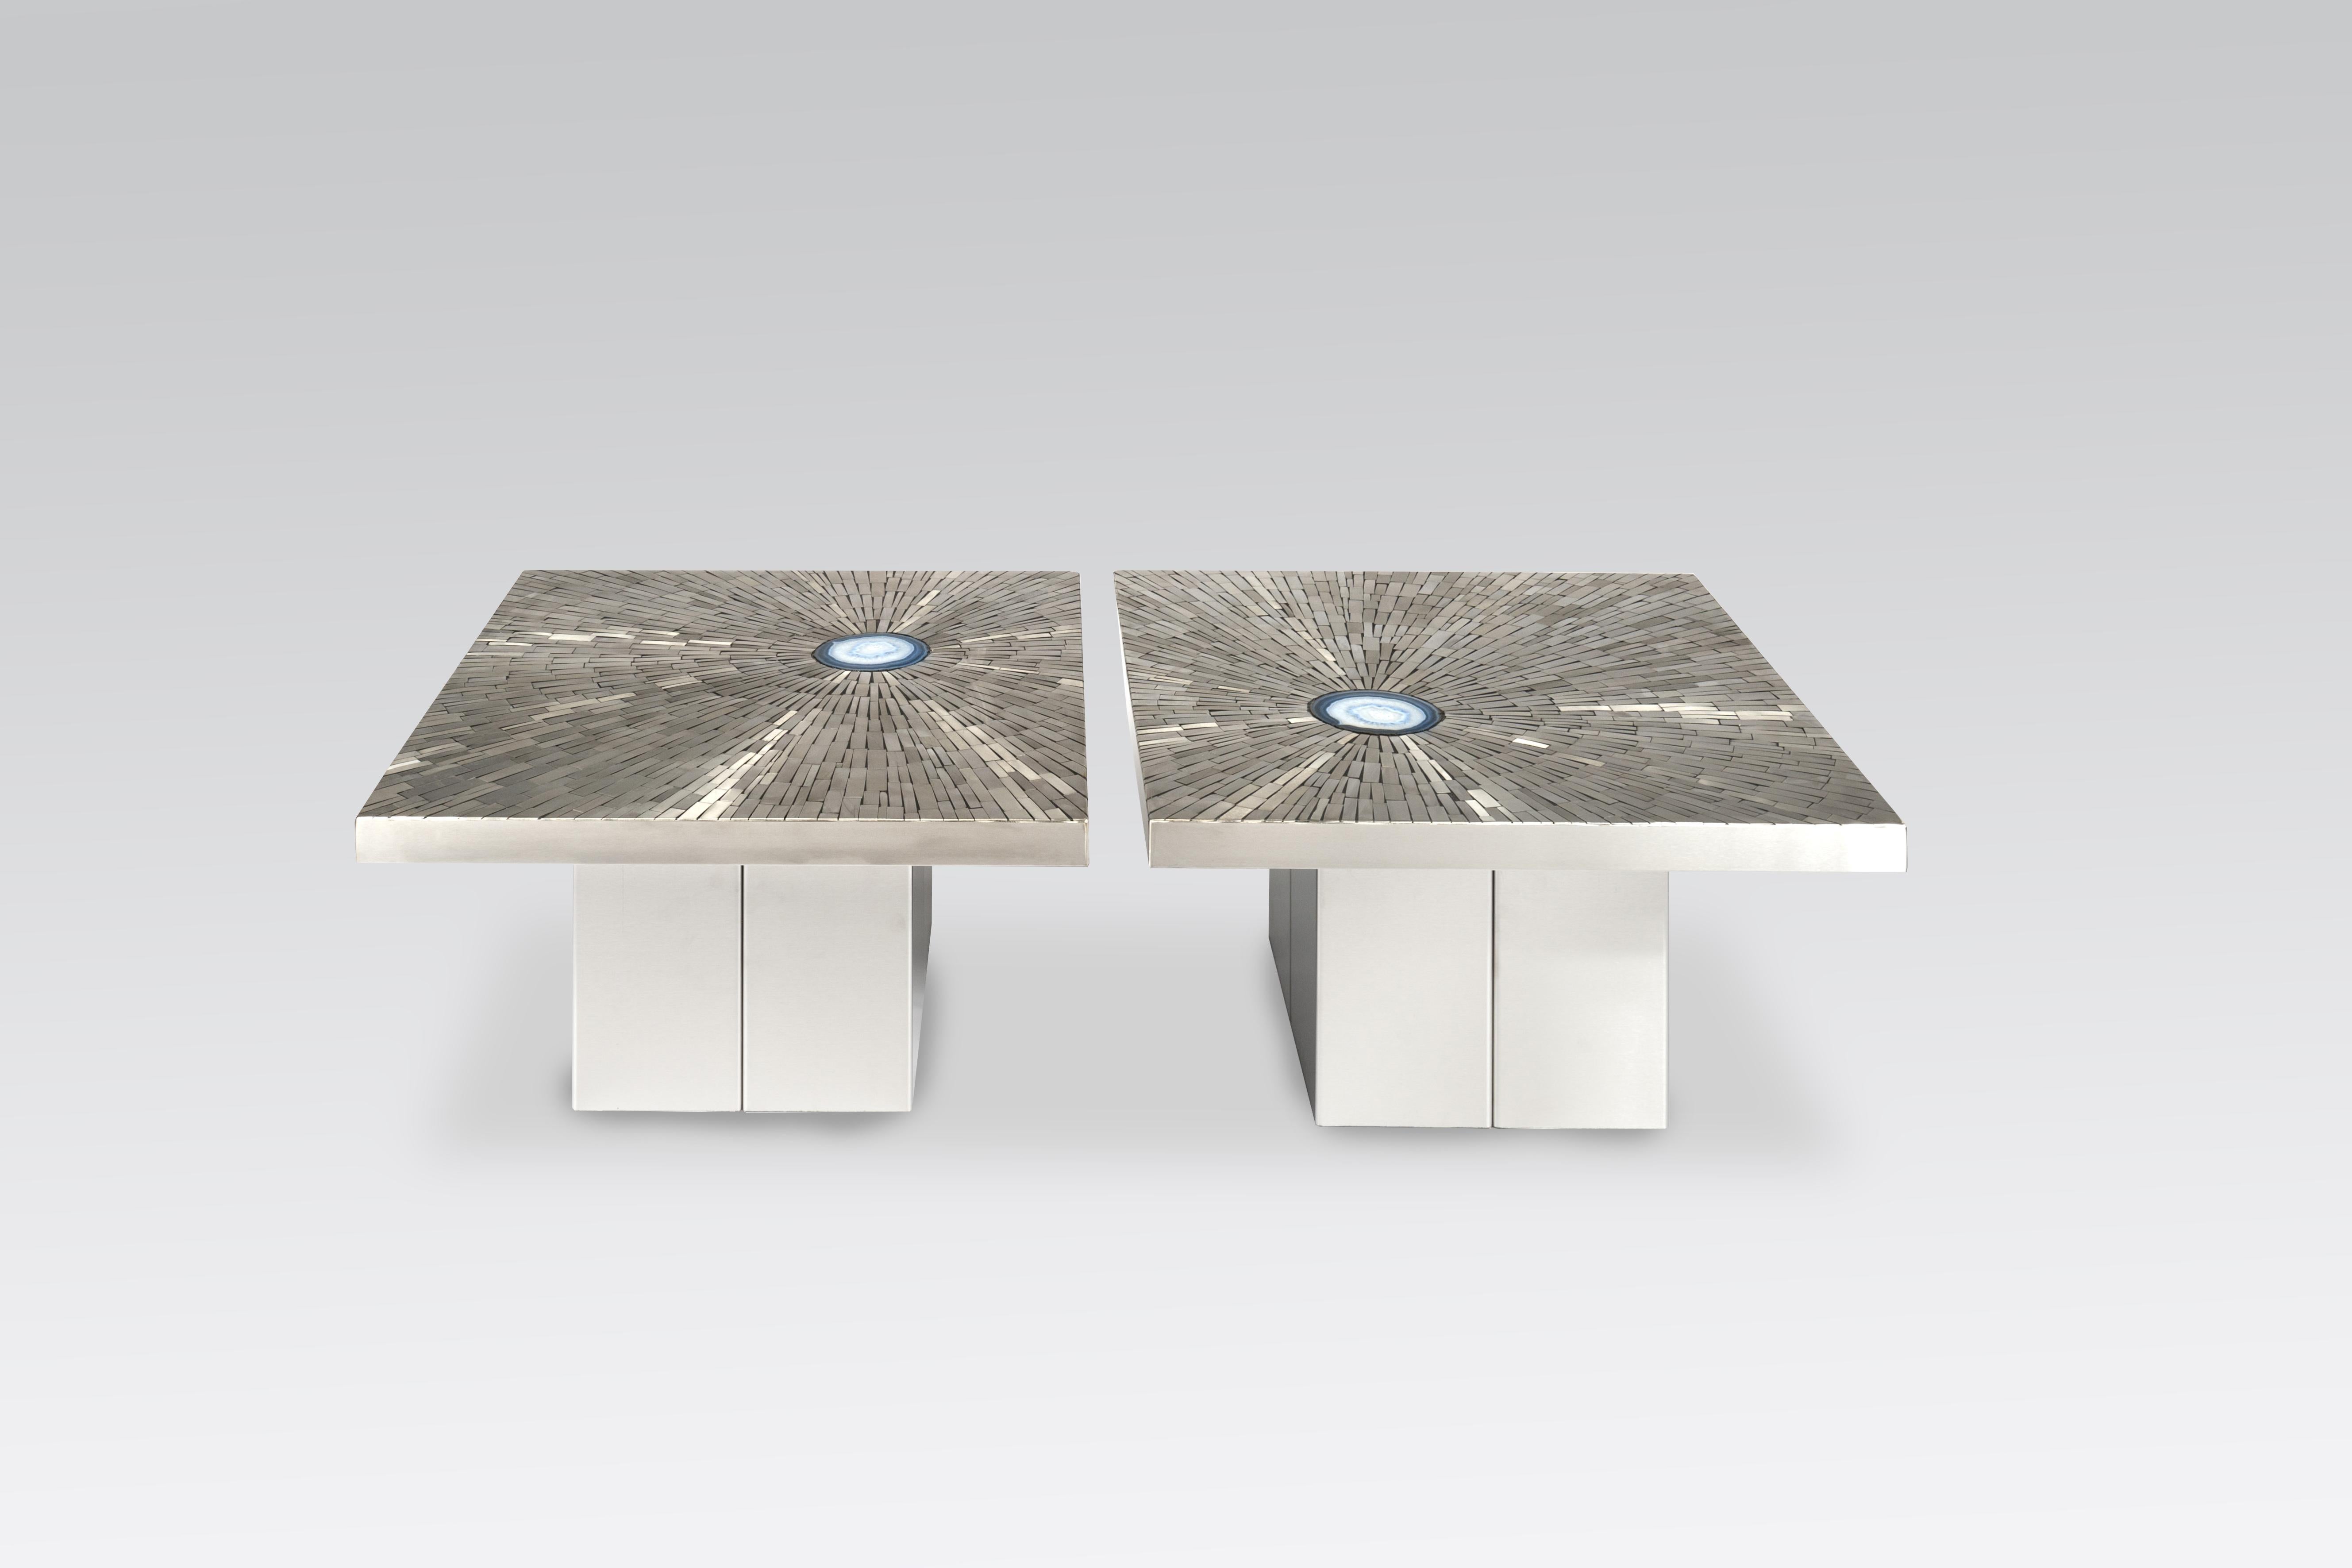 Created to measure by Stan Usel, this pair of side table in mosaic stainless steel and blue agates gemstone. Form Exceptional craftsmanship with the art of tailor made furniture. This original and unique pieces are signed by the artist and comes